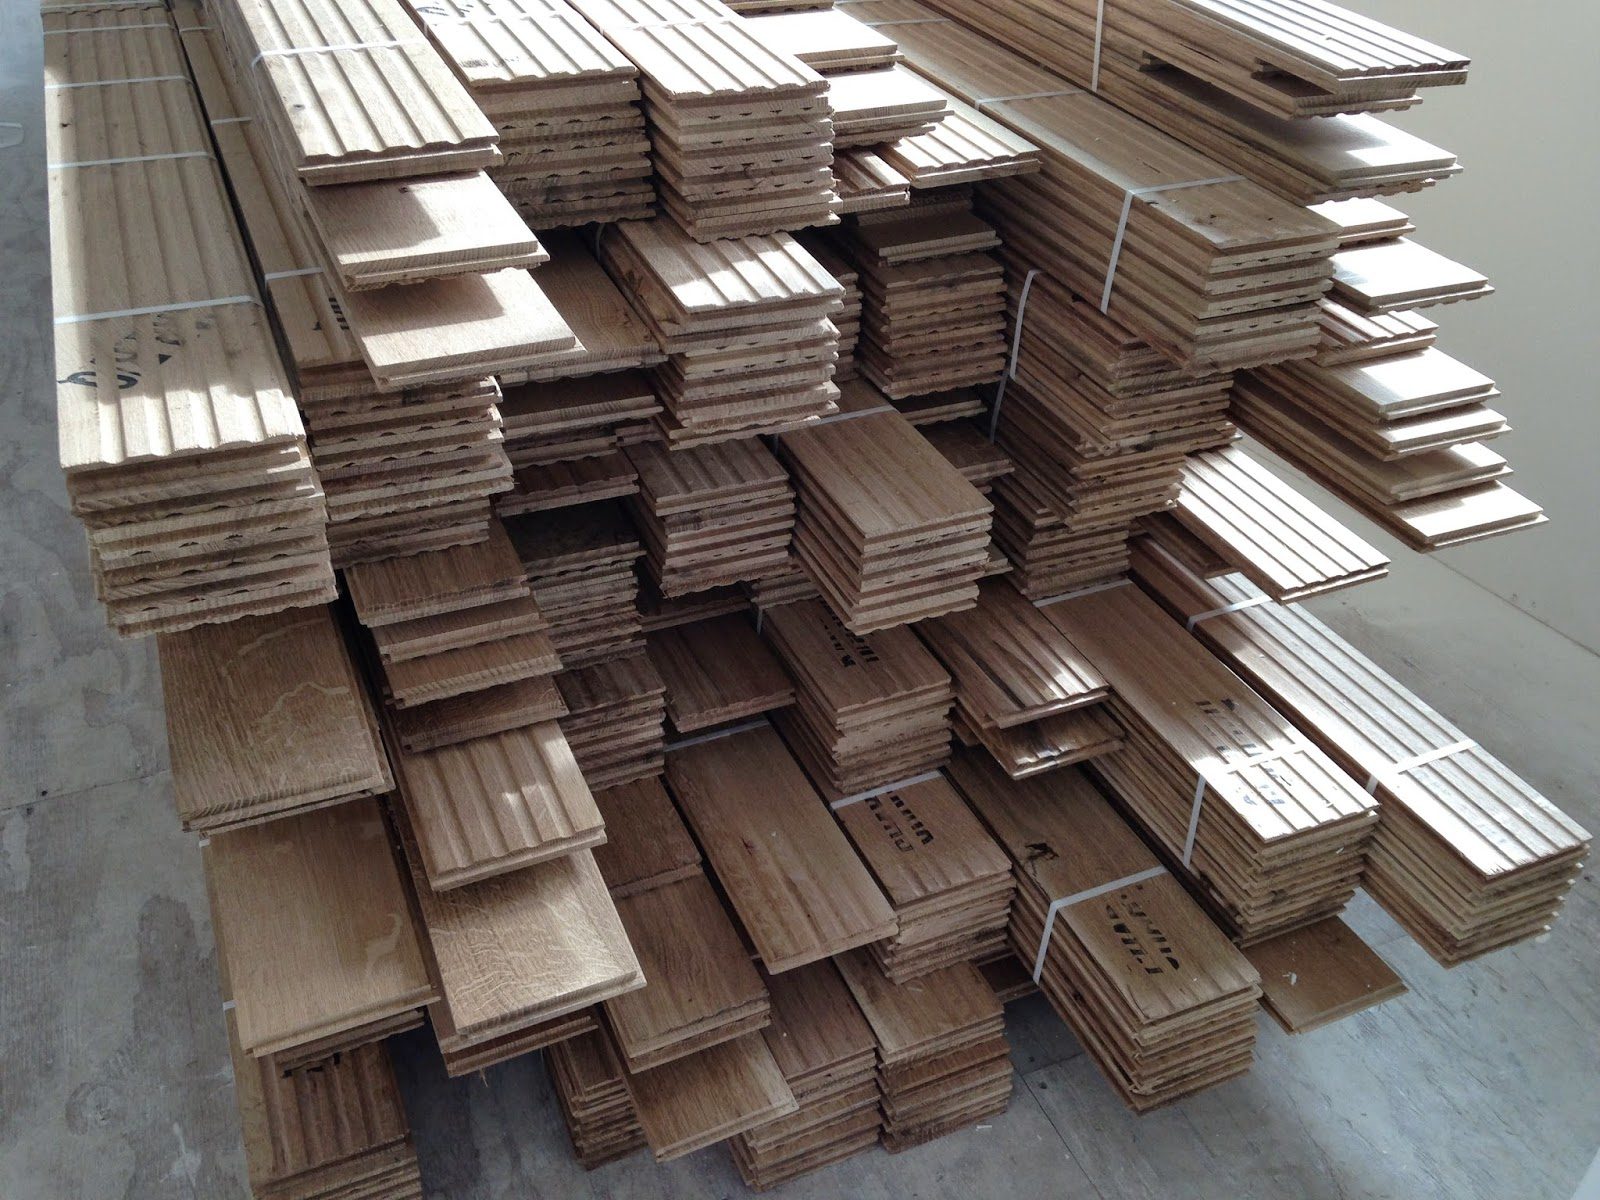 acclimating_the_floor|acclimataing_flooring|acclimation_the_floor_boards_in_the_boxes